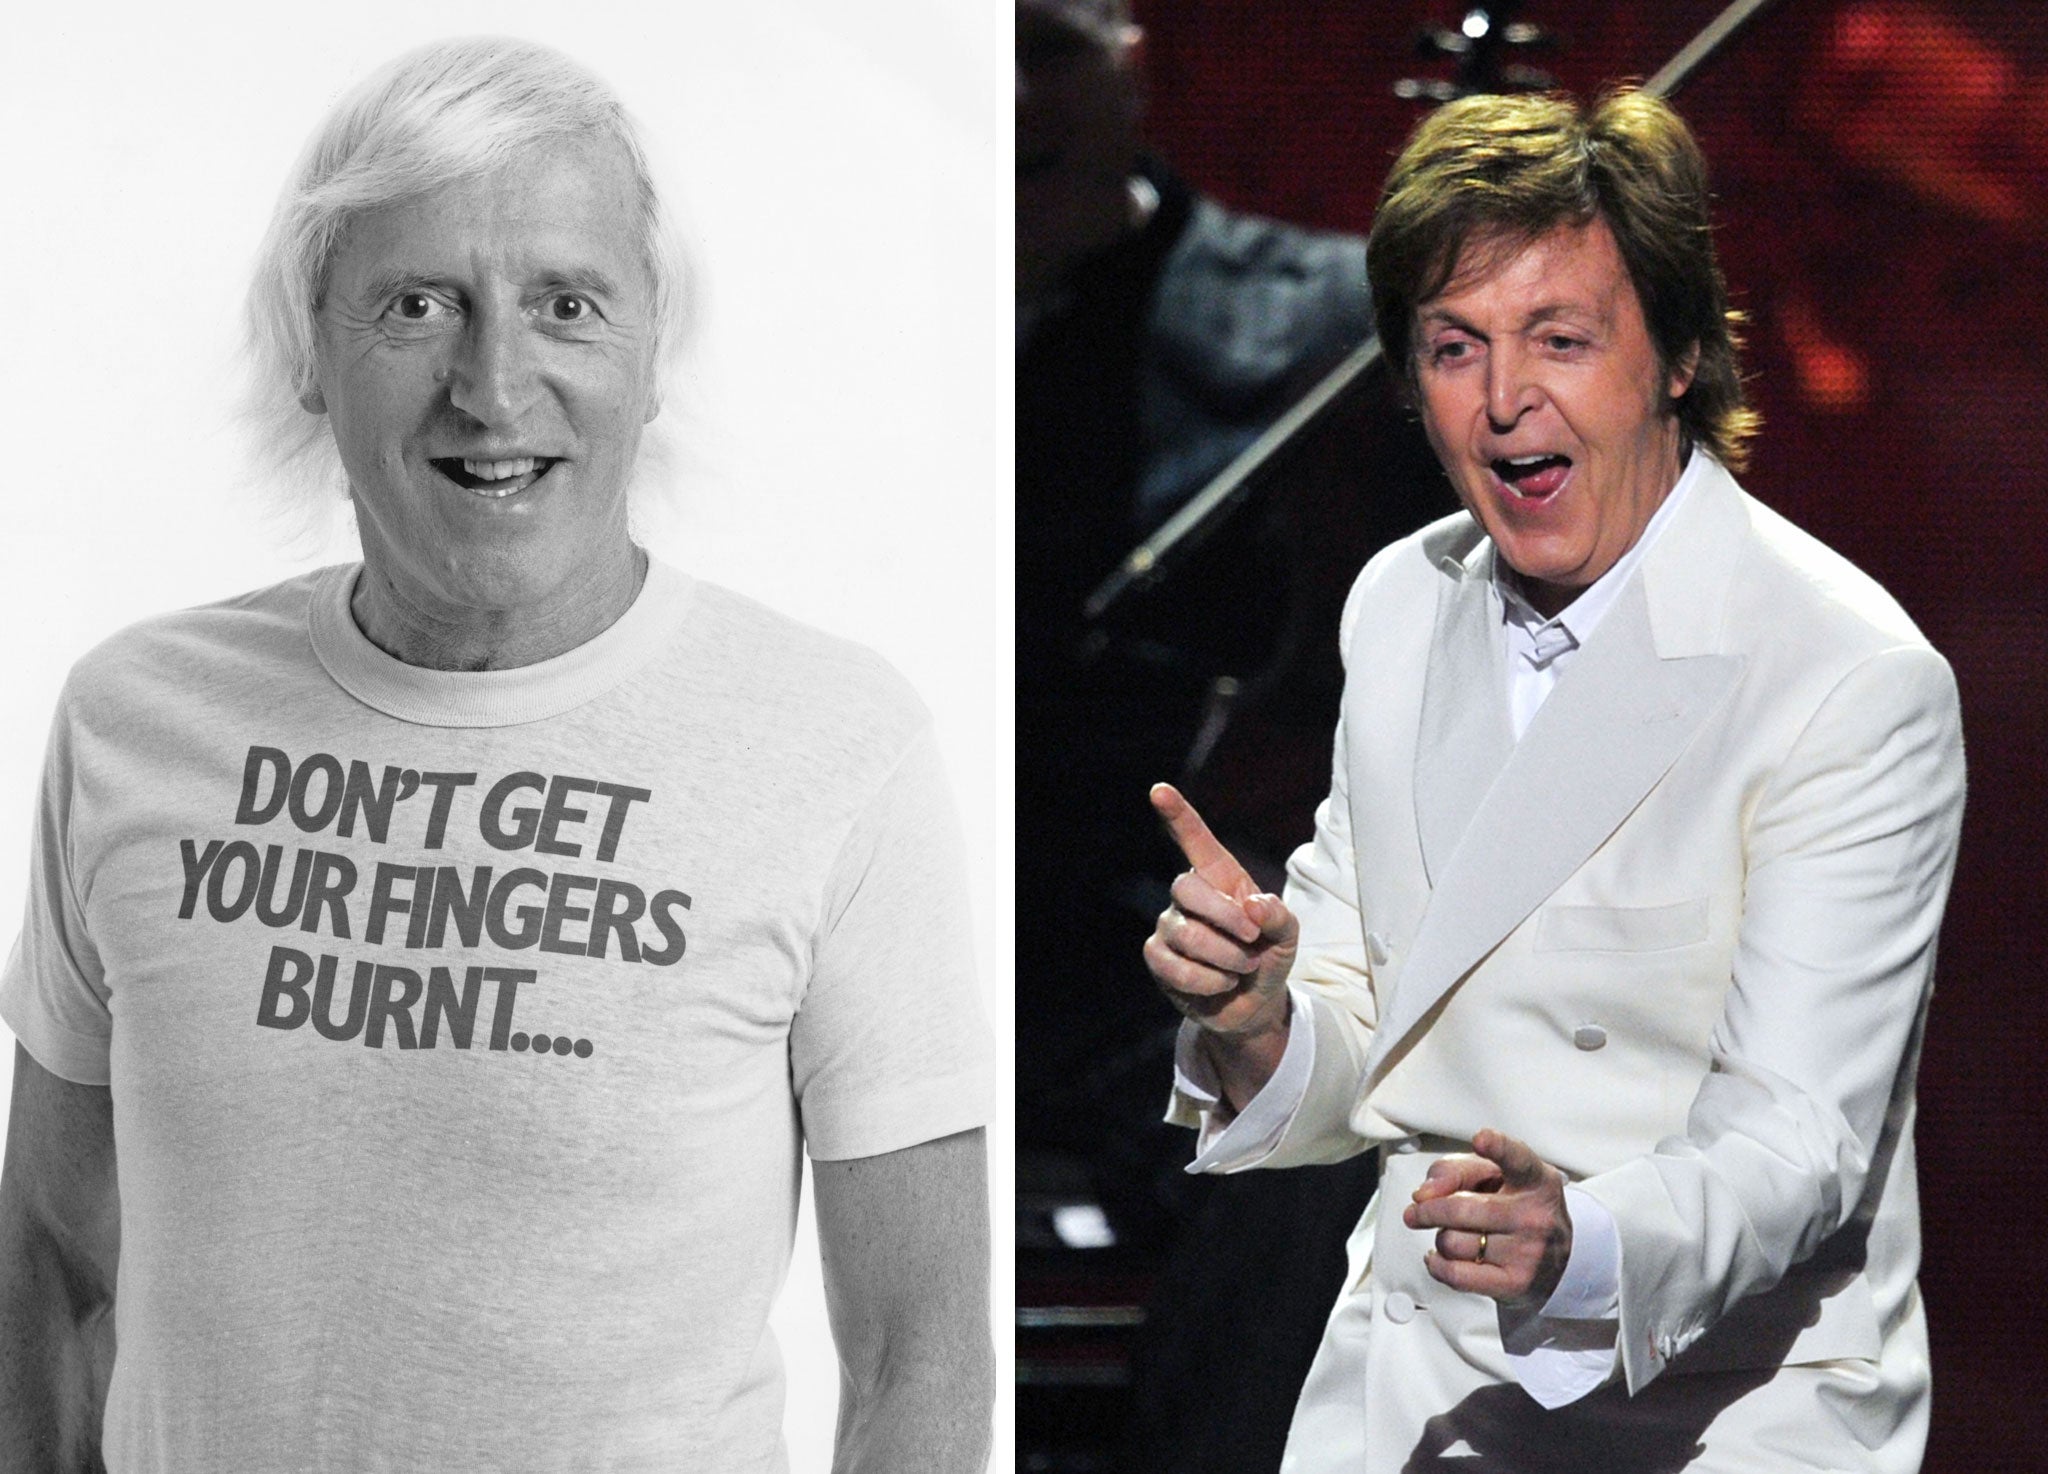 Sir Paul McCartney: We always thought there was something a little bit suspect about Jimmy Savile